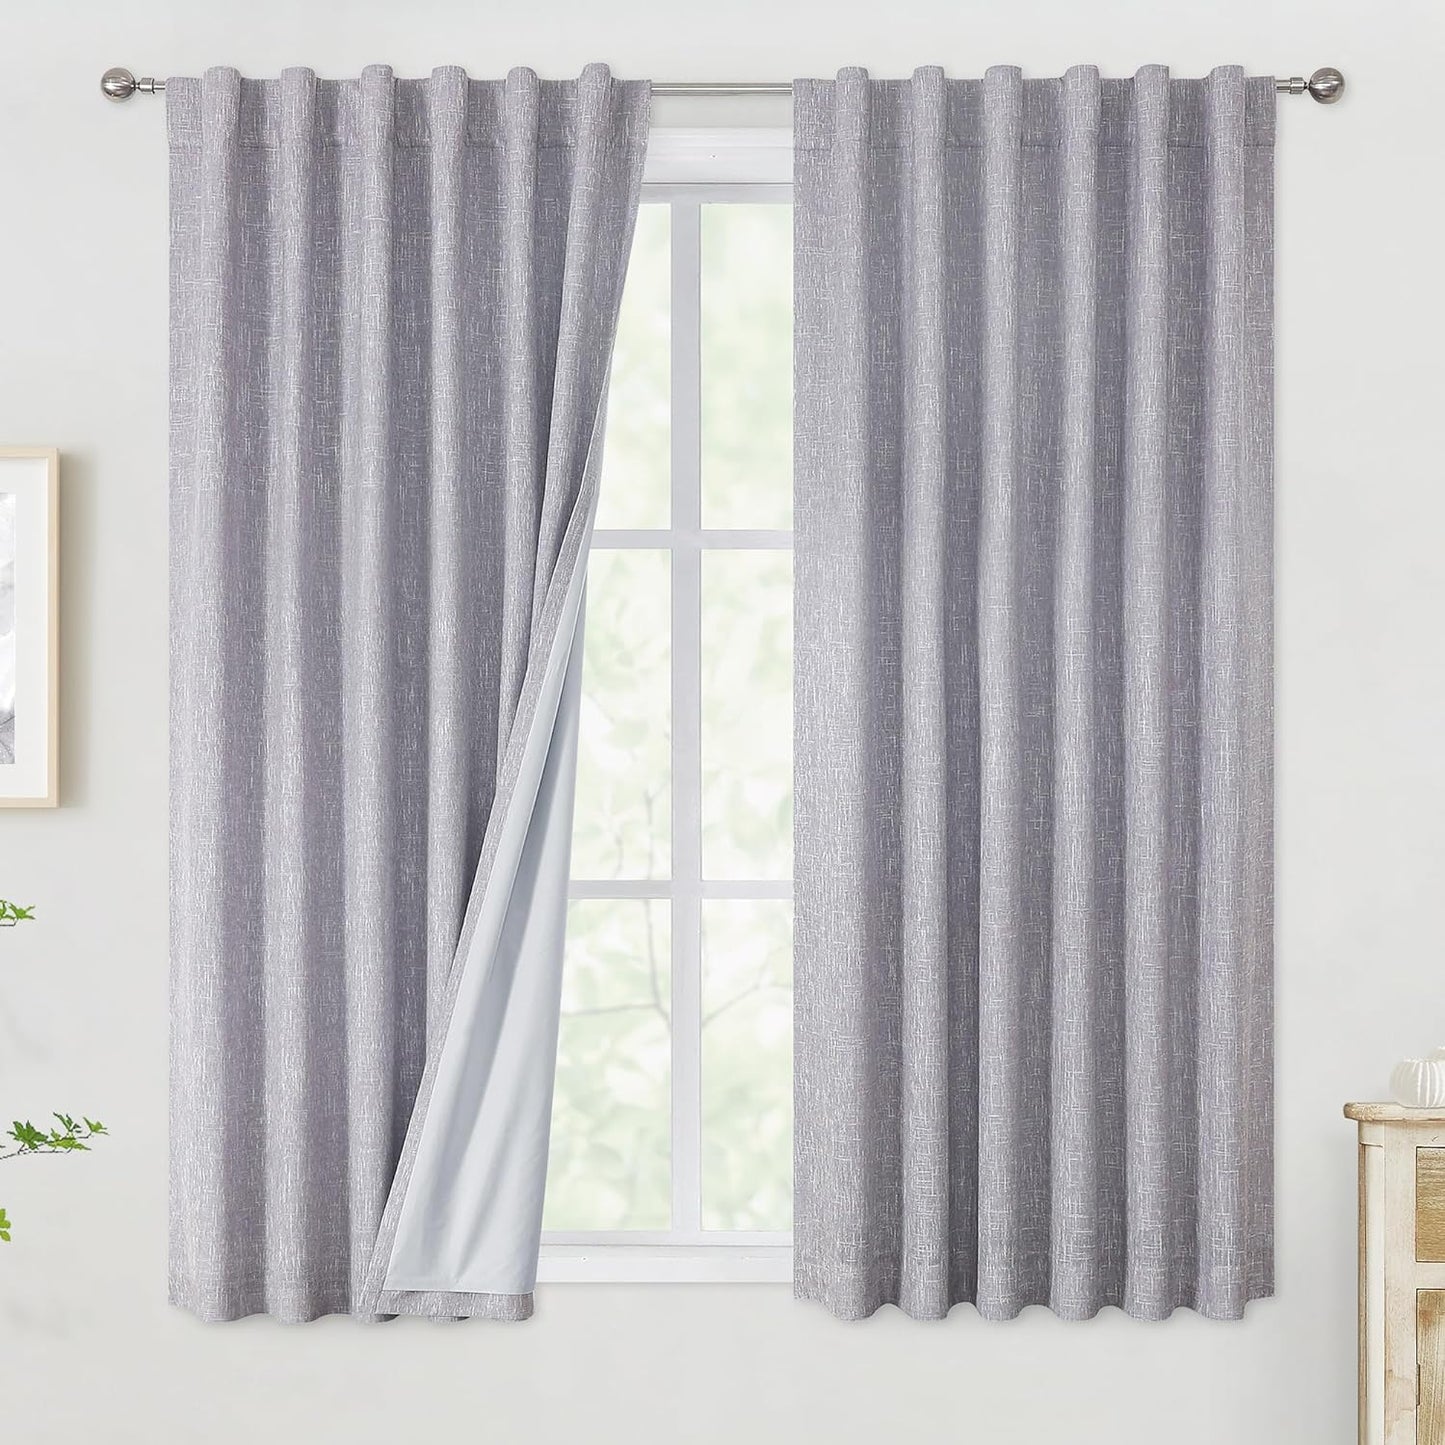 Vision Home Beige Full Blackout Curtains 84 Inch for Bedroom Living Room Darkening Farmhouse Window Treatment Panels Thermal Insulated Rod Pocket Back Tab Soundproof Linen Drapes 2 Panels 50" Wx84 L  Vision Home Lavender 50"X63"X2 